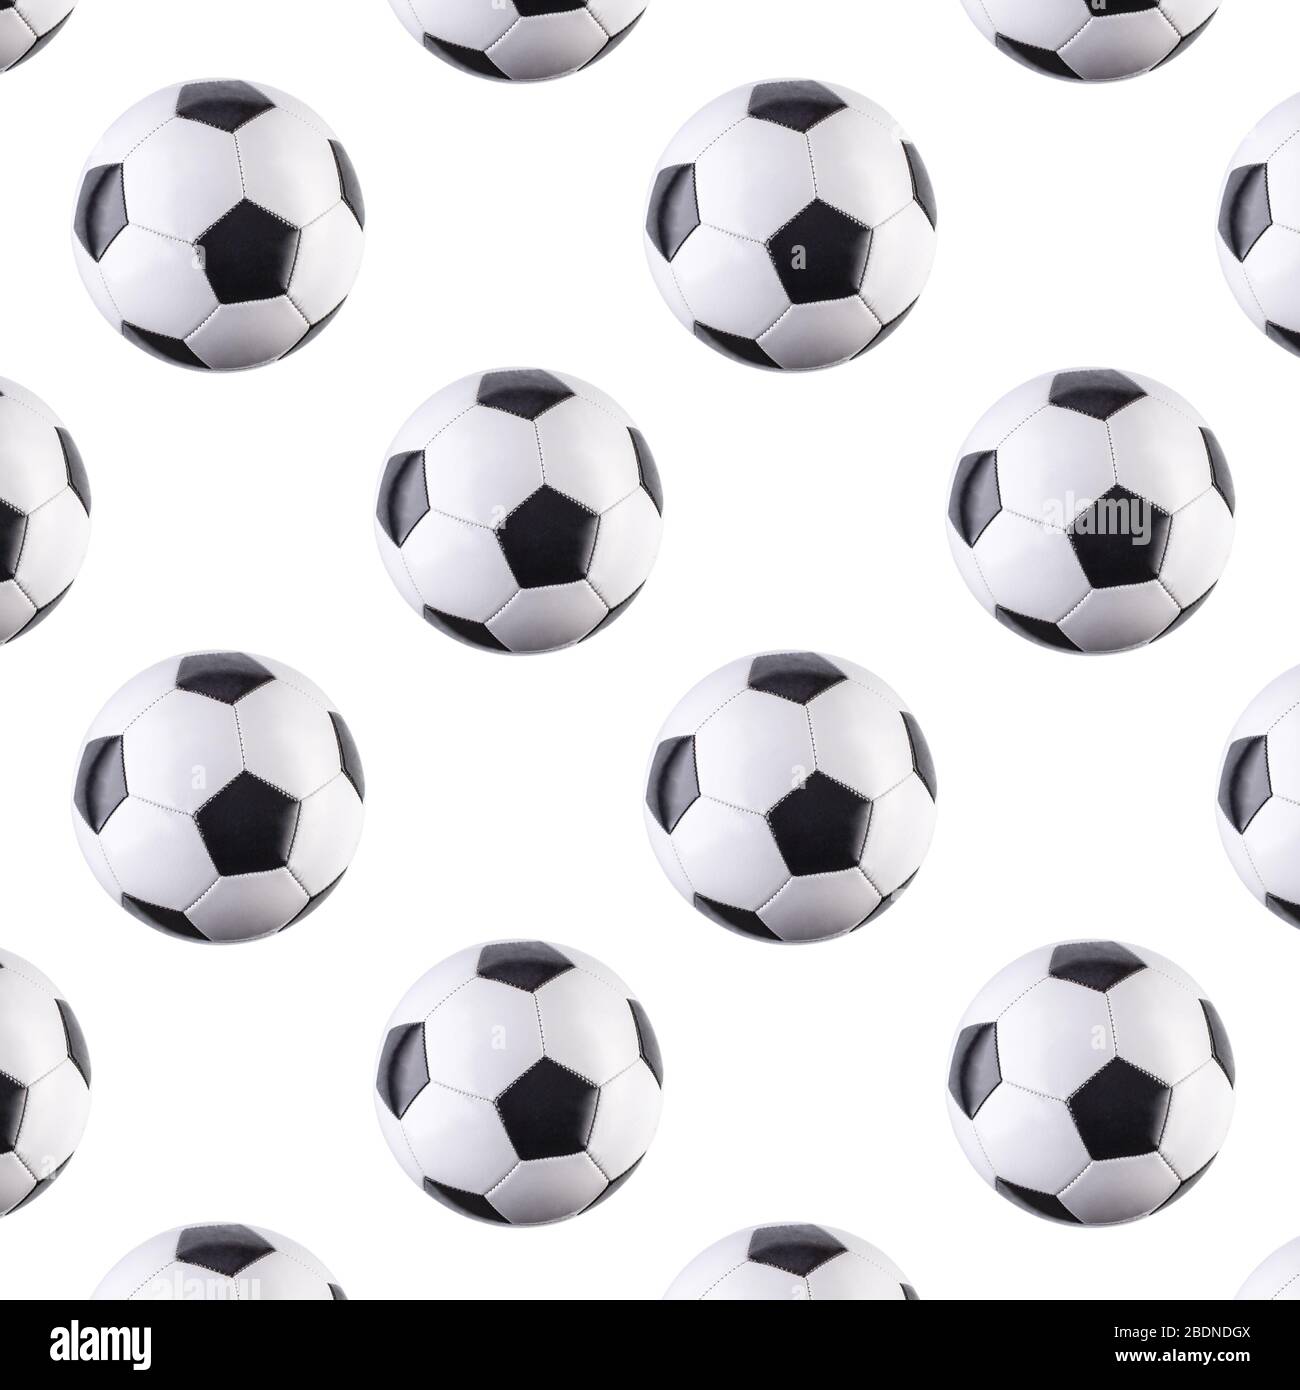 Seamless pattern of balls. Black and white soccer balls flying in the air, isolated on white background. Minimalistic concept of sports Stock Photo